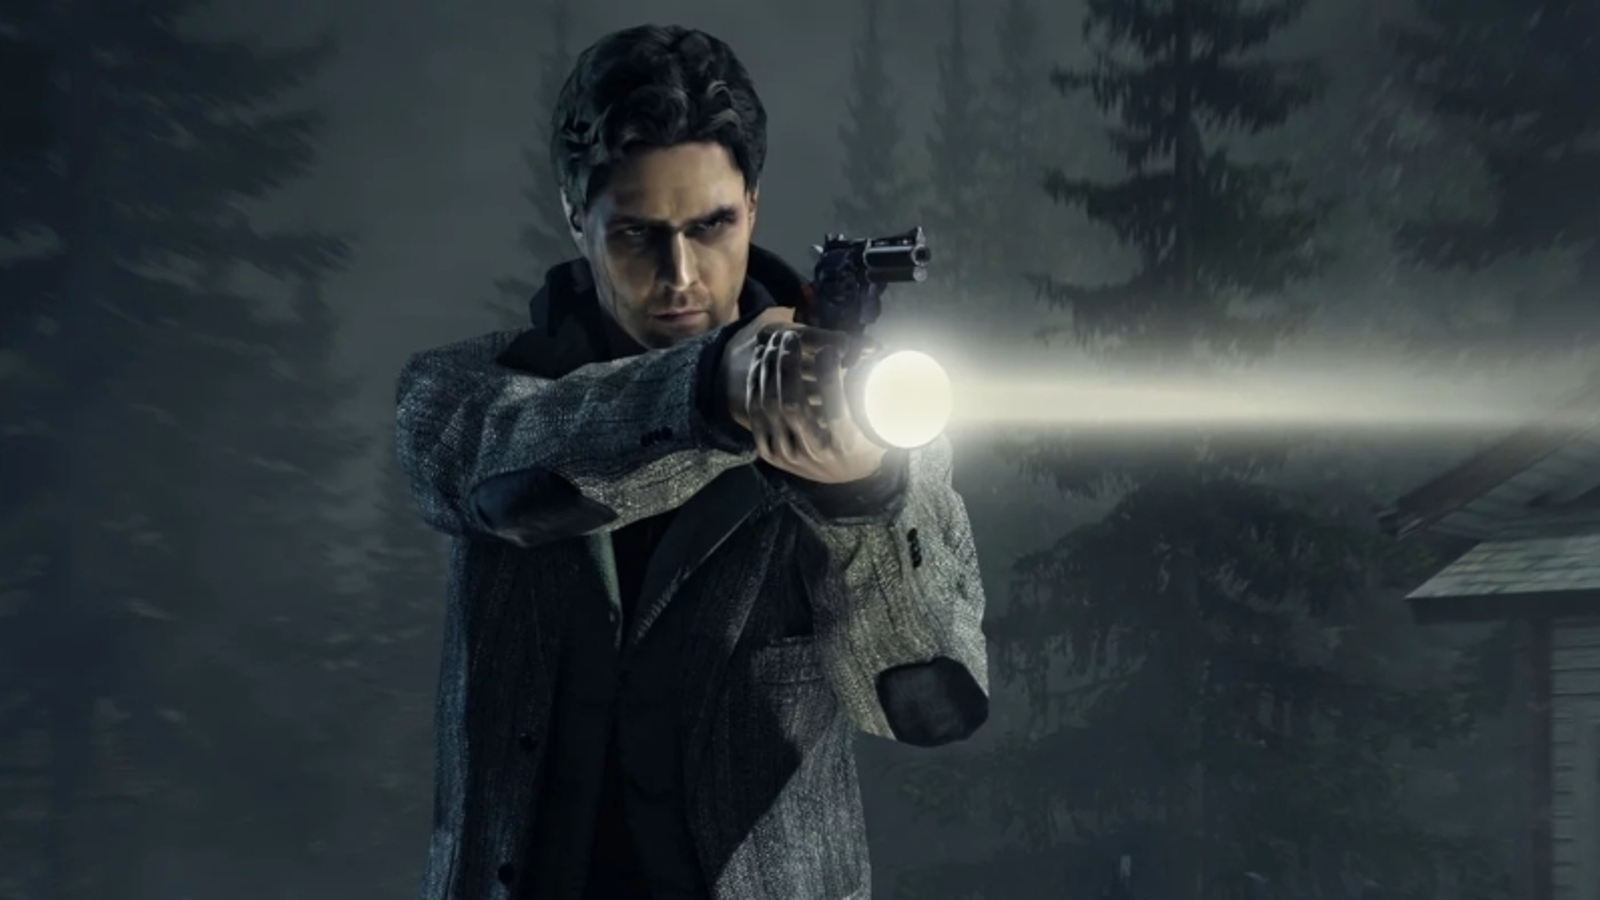 Alan Wake 2 on Game Pass: Is It Coming? 